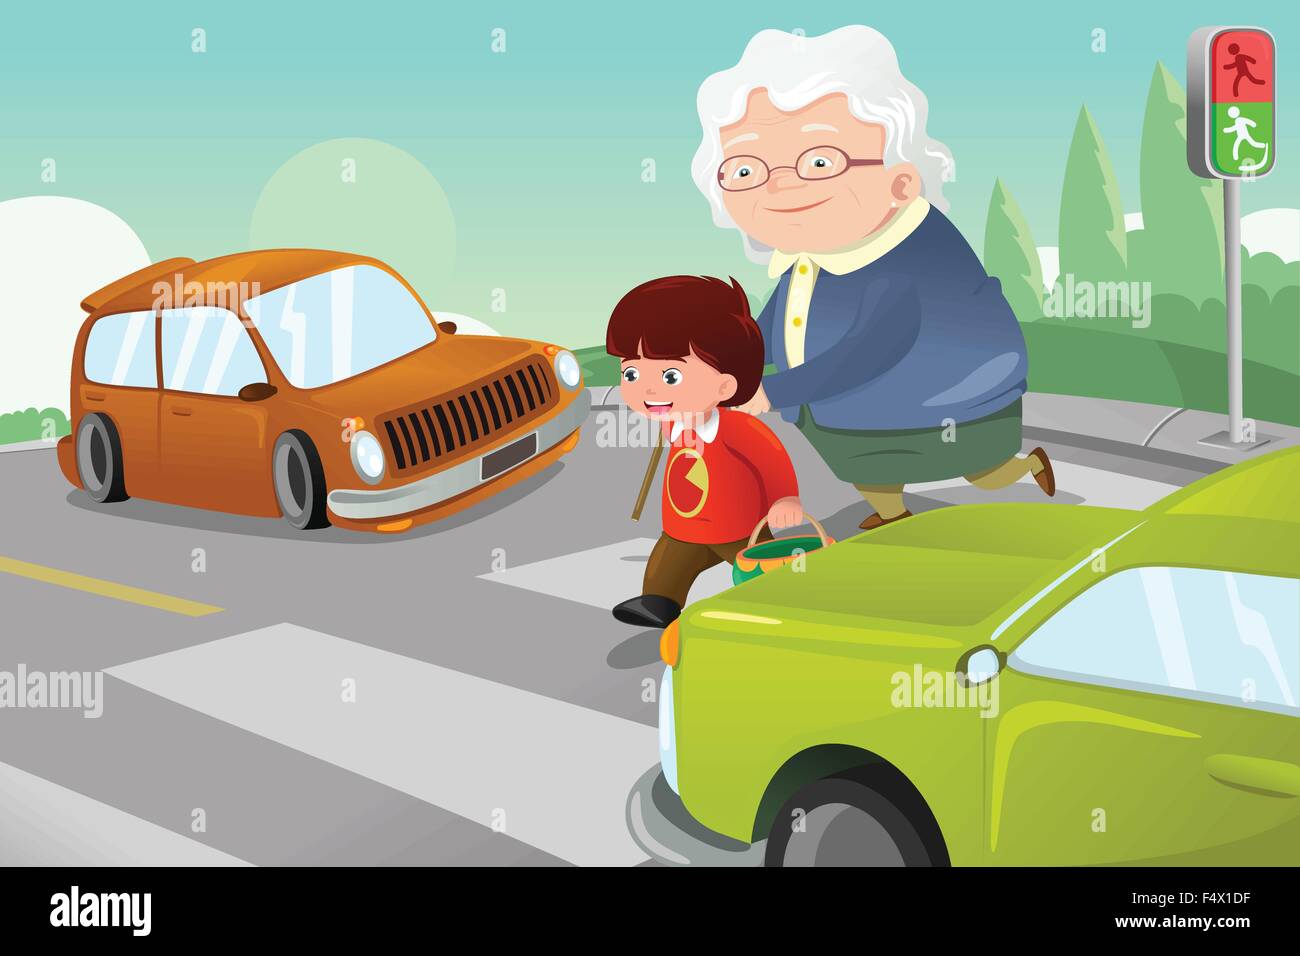 A vector illustration of kid helping senior lady crossing the street Stock Vector